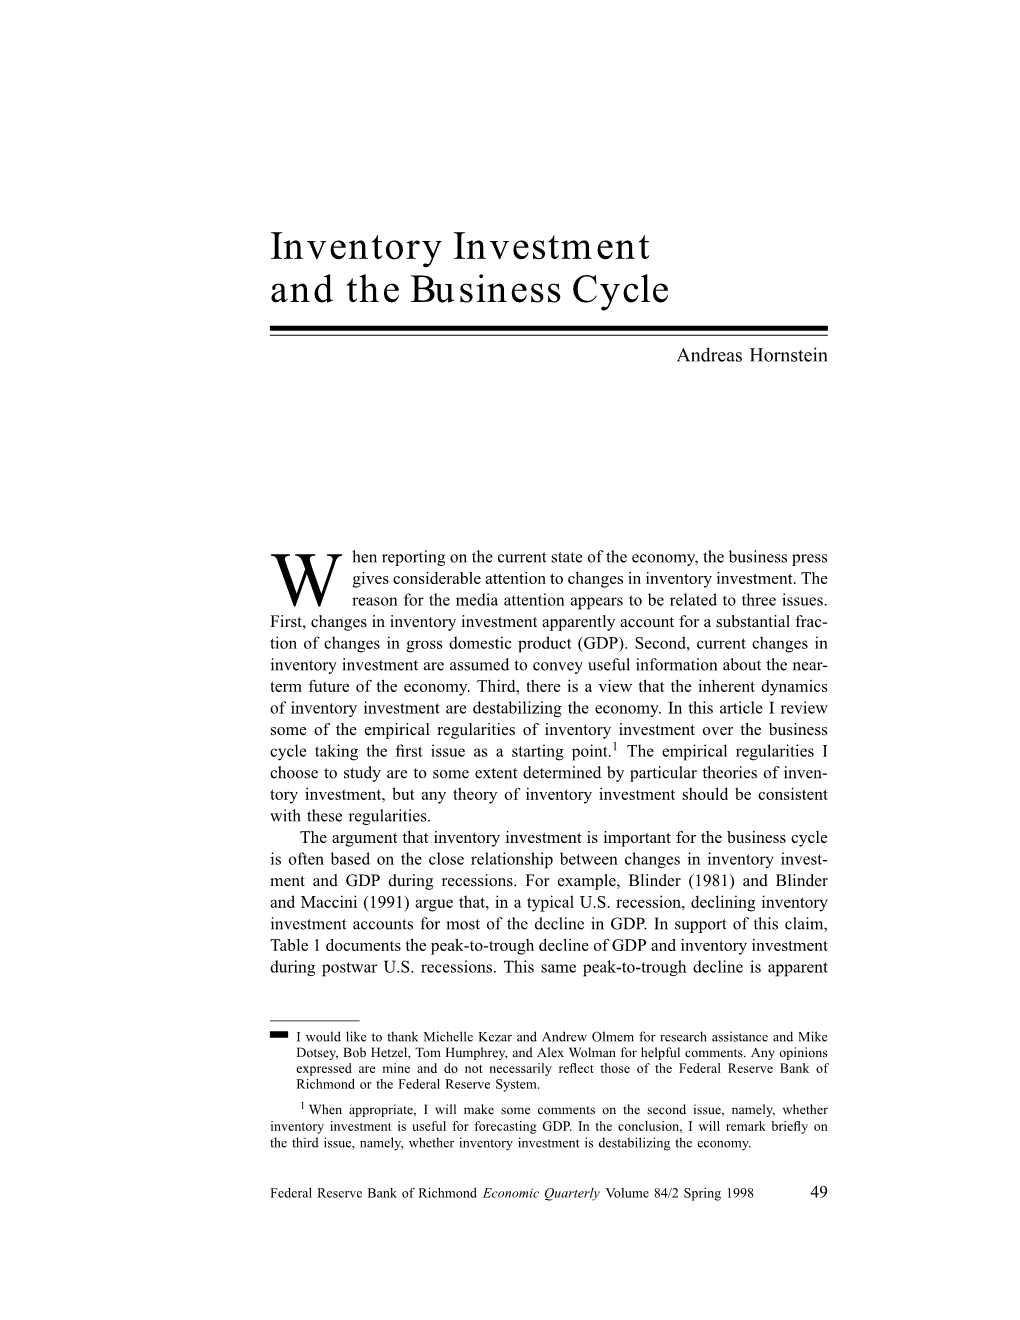 Inventory Investment and the Business Cycle